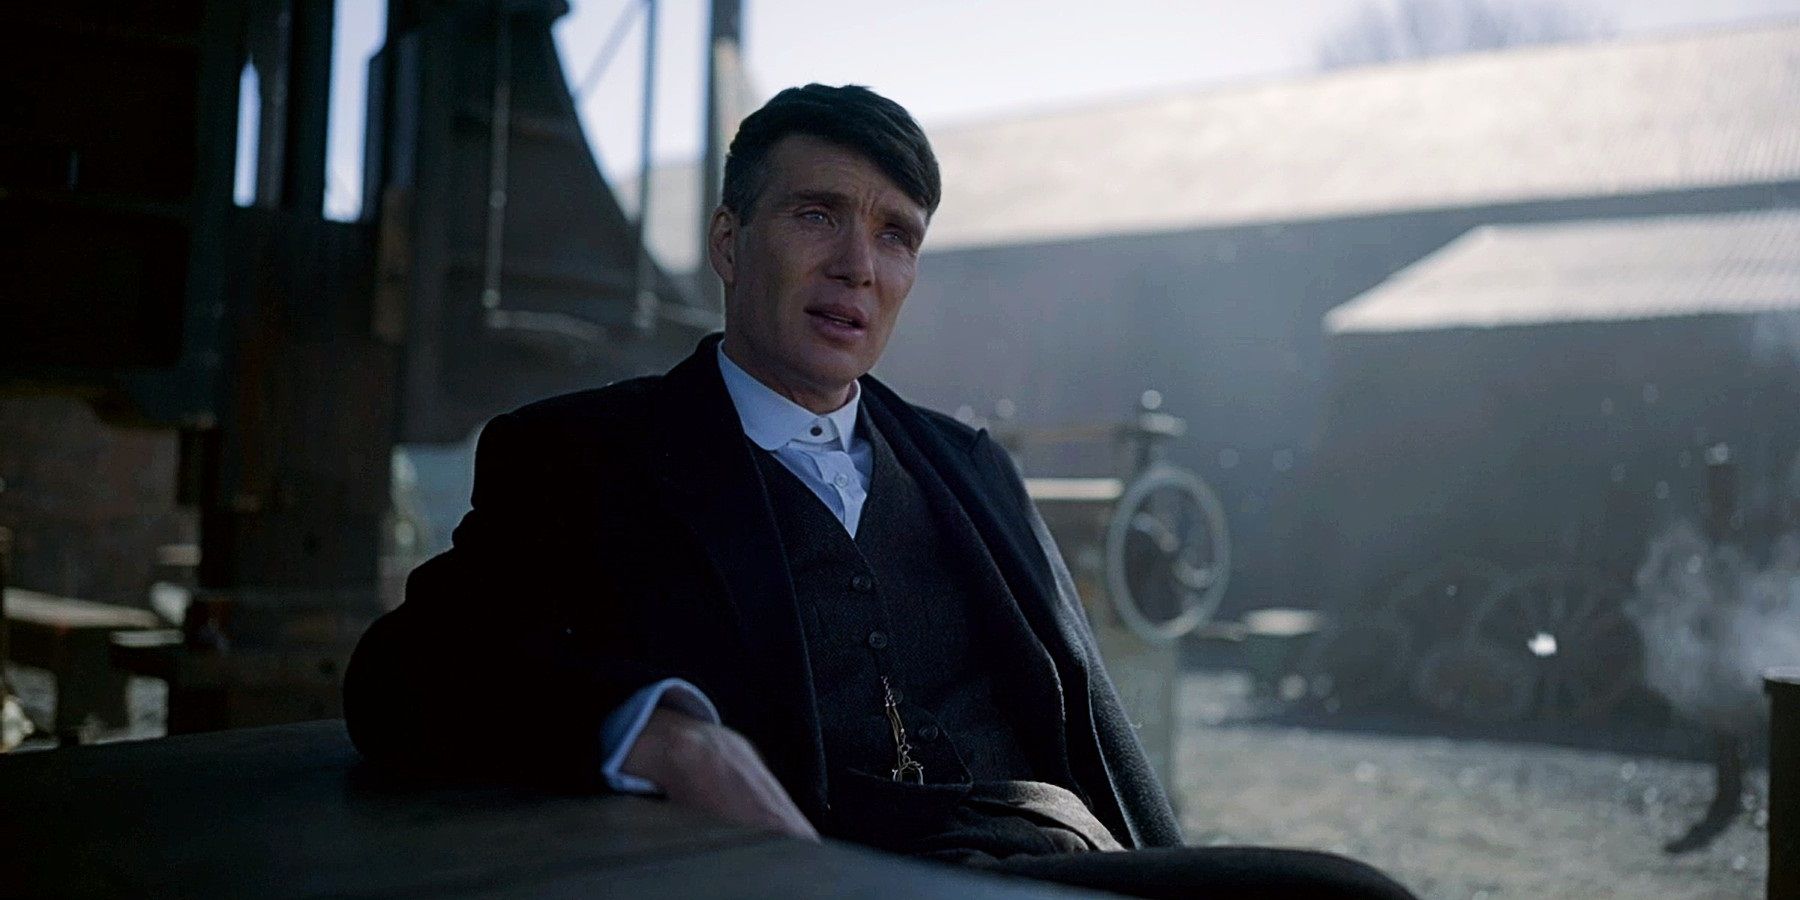 Cillian Murphy says he's 'open' to a 'Peaky Blinders' movie - ABC News